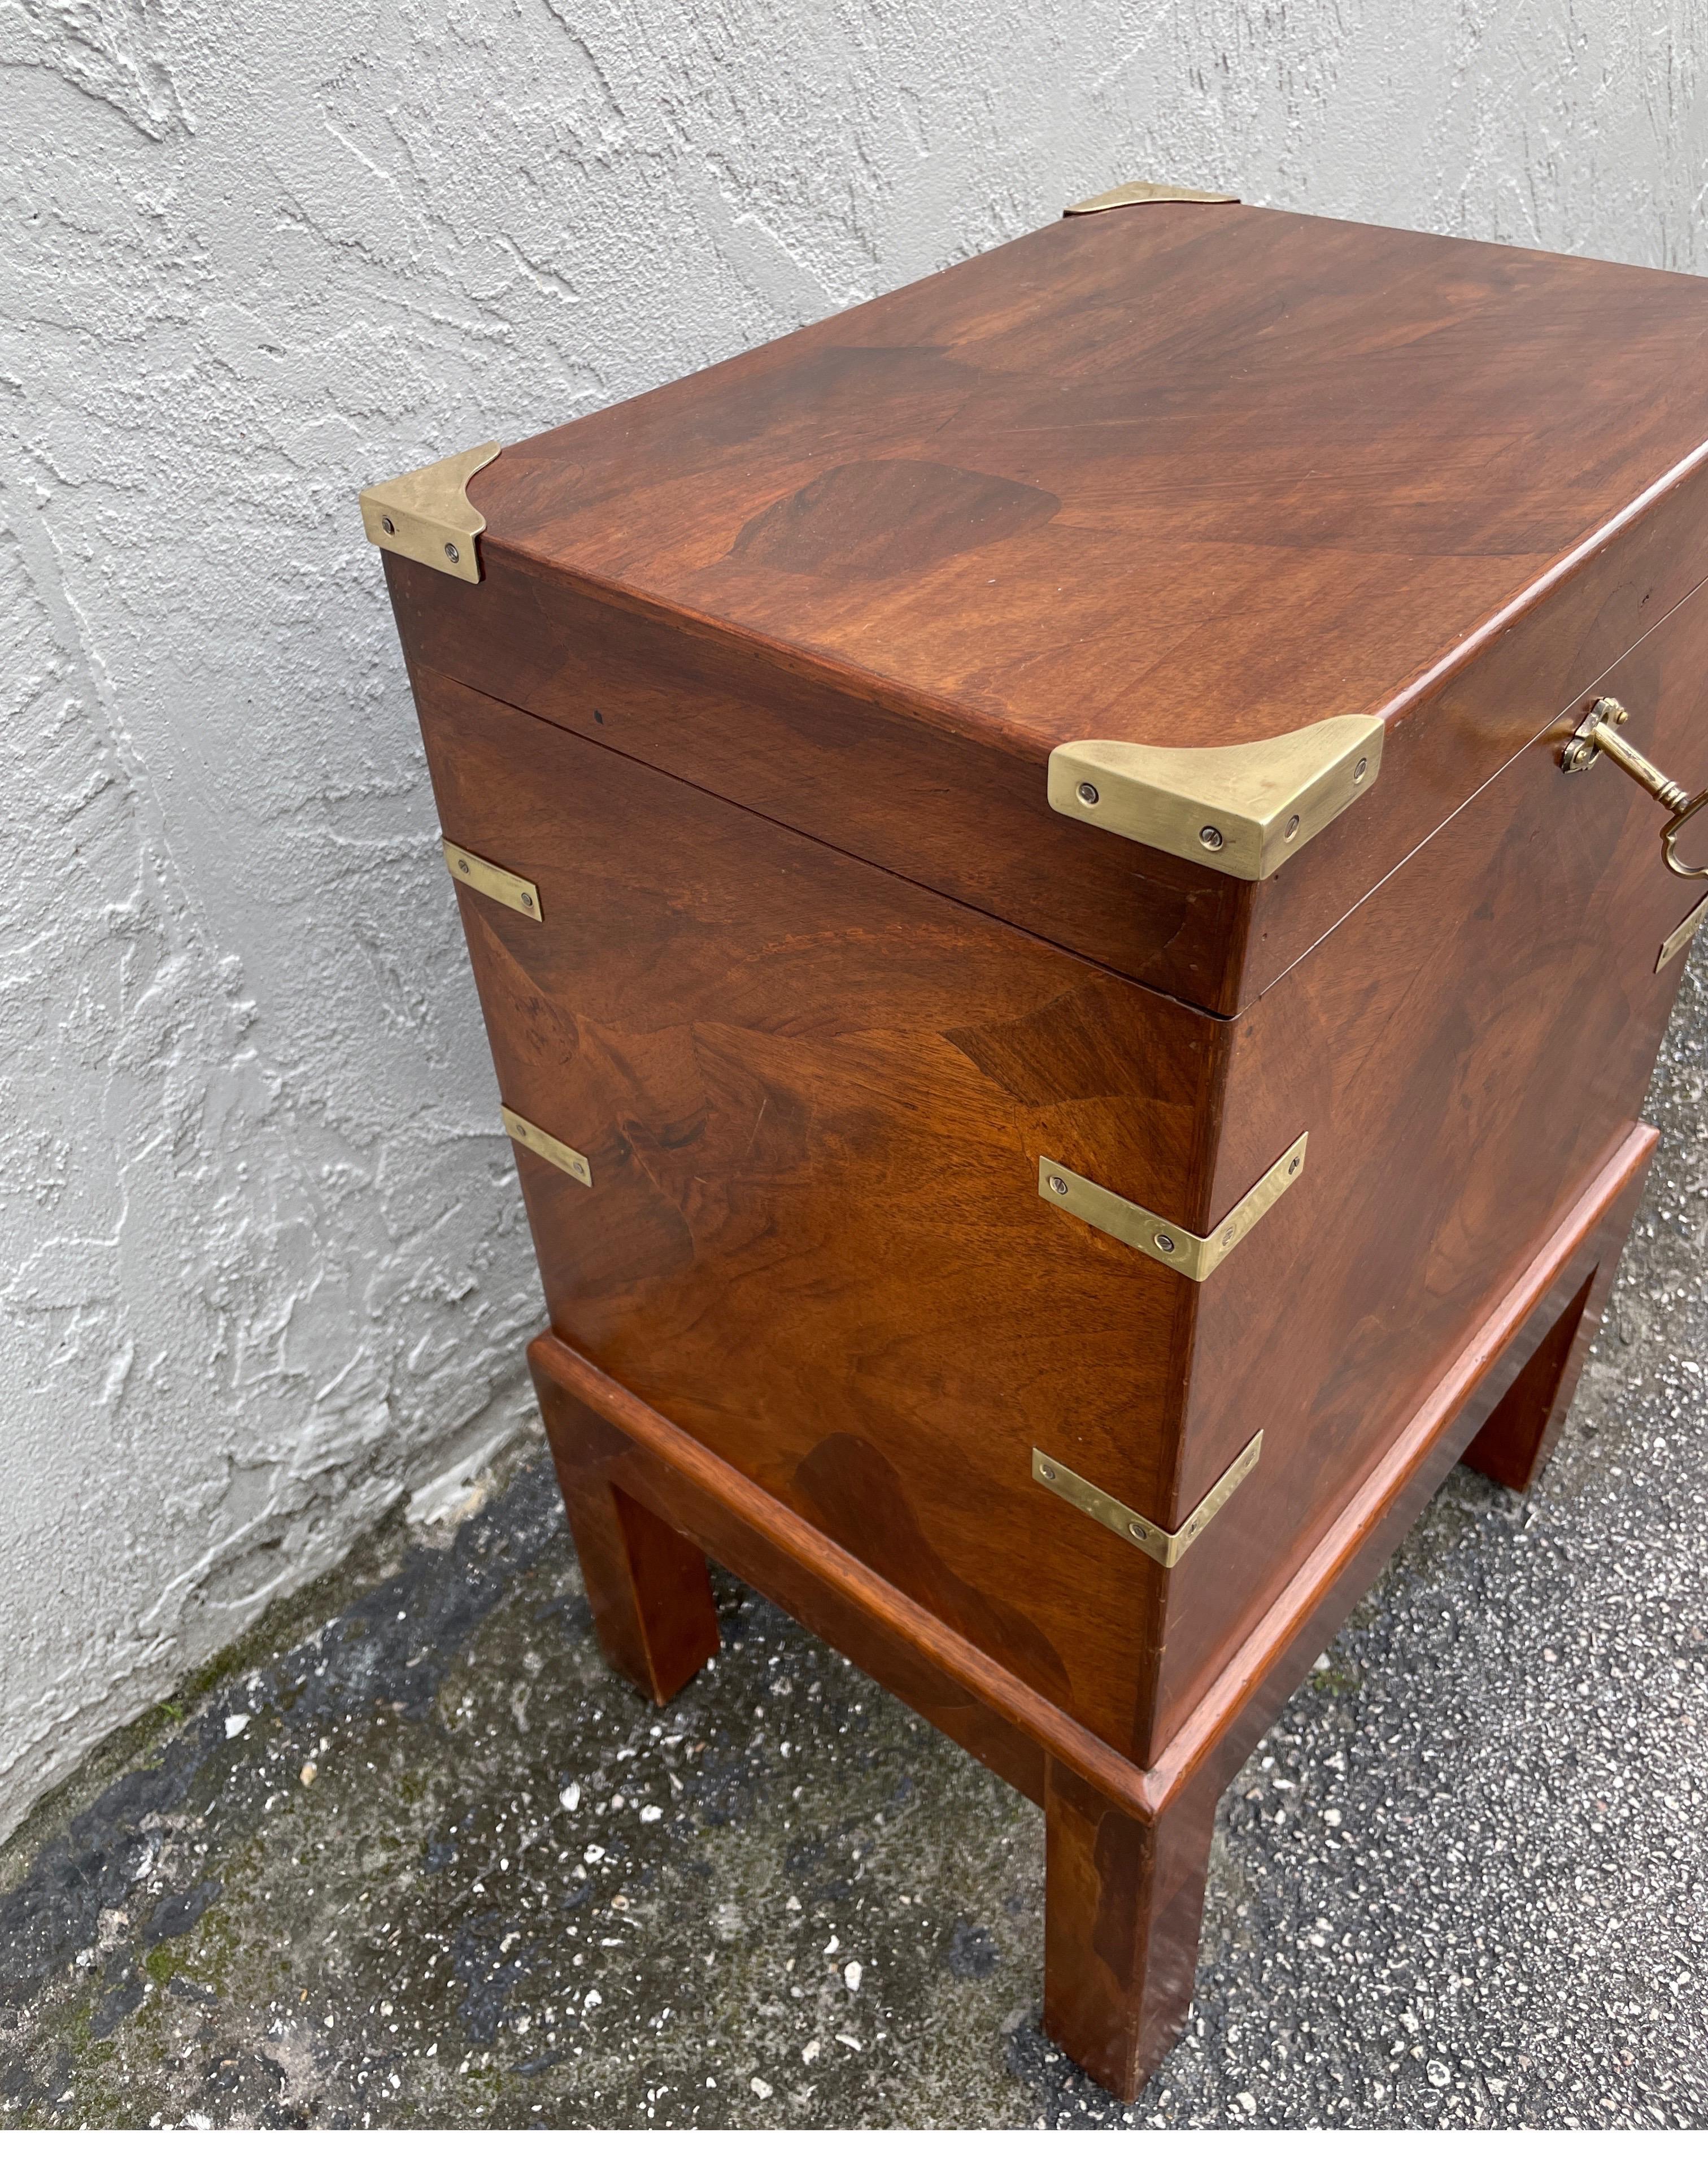 Vintage Campaign Style Box on stand with brass hardware.  Opens for storage & is a wonderful side table.